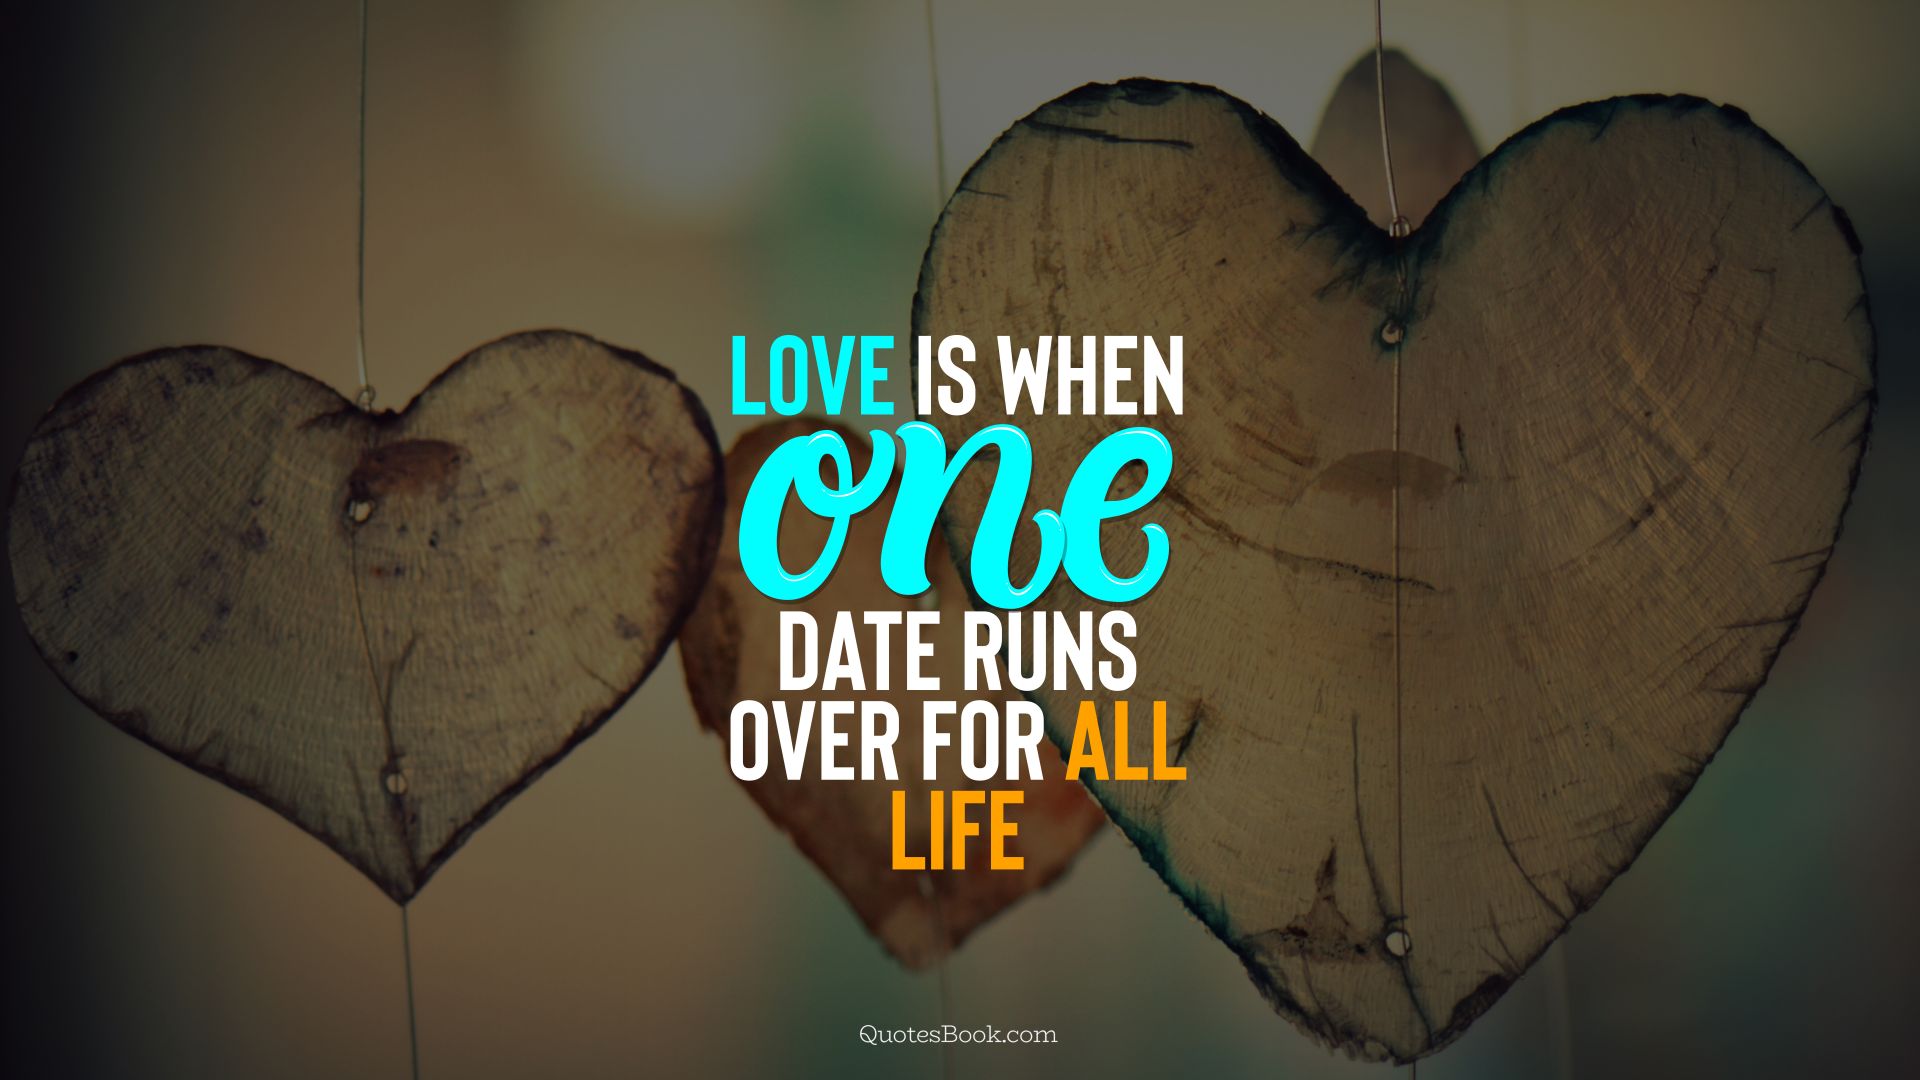 Love is when one date runs over for all life. - Quote by QuotesBook